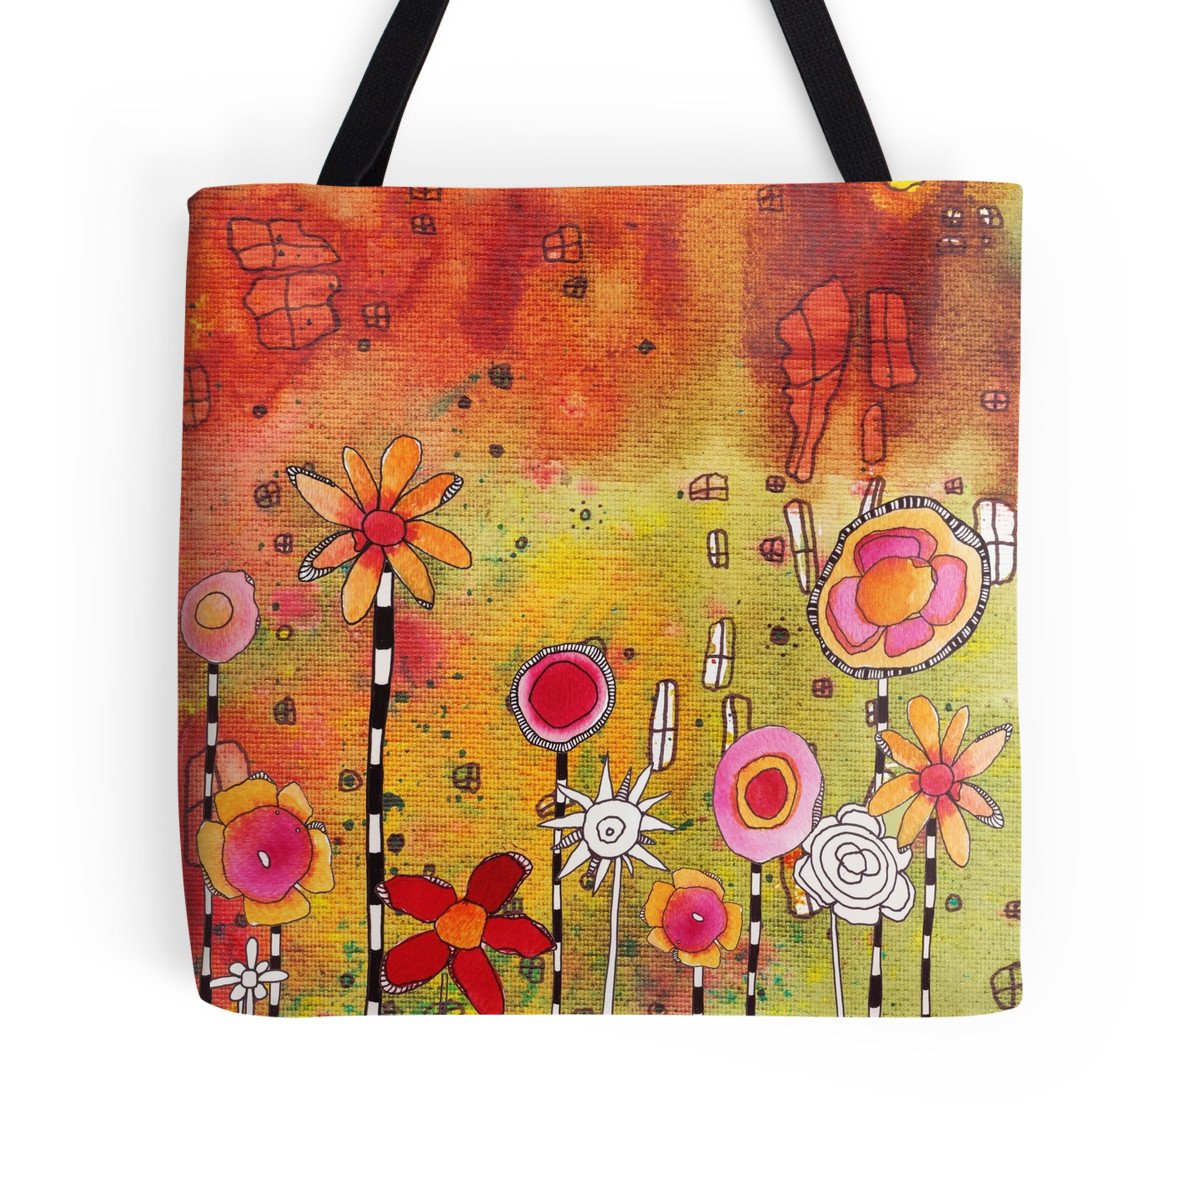 Tote Bag Mixed Media Art 'Garden Party painted by C.Cambrea featured in  Haute Handbags - Sincerely Joy